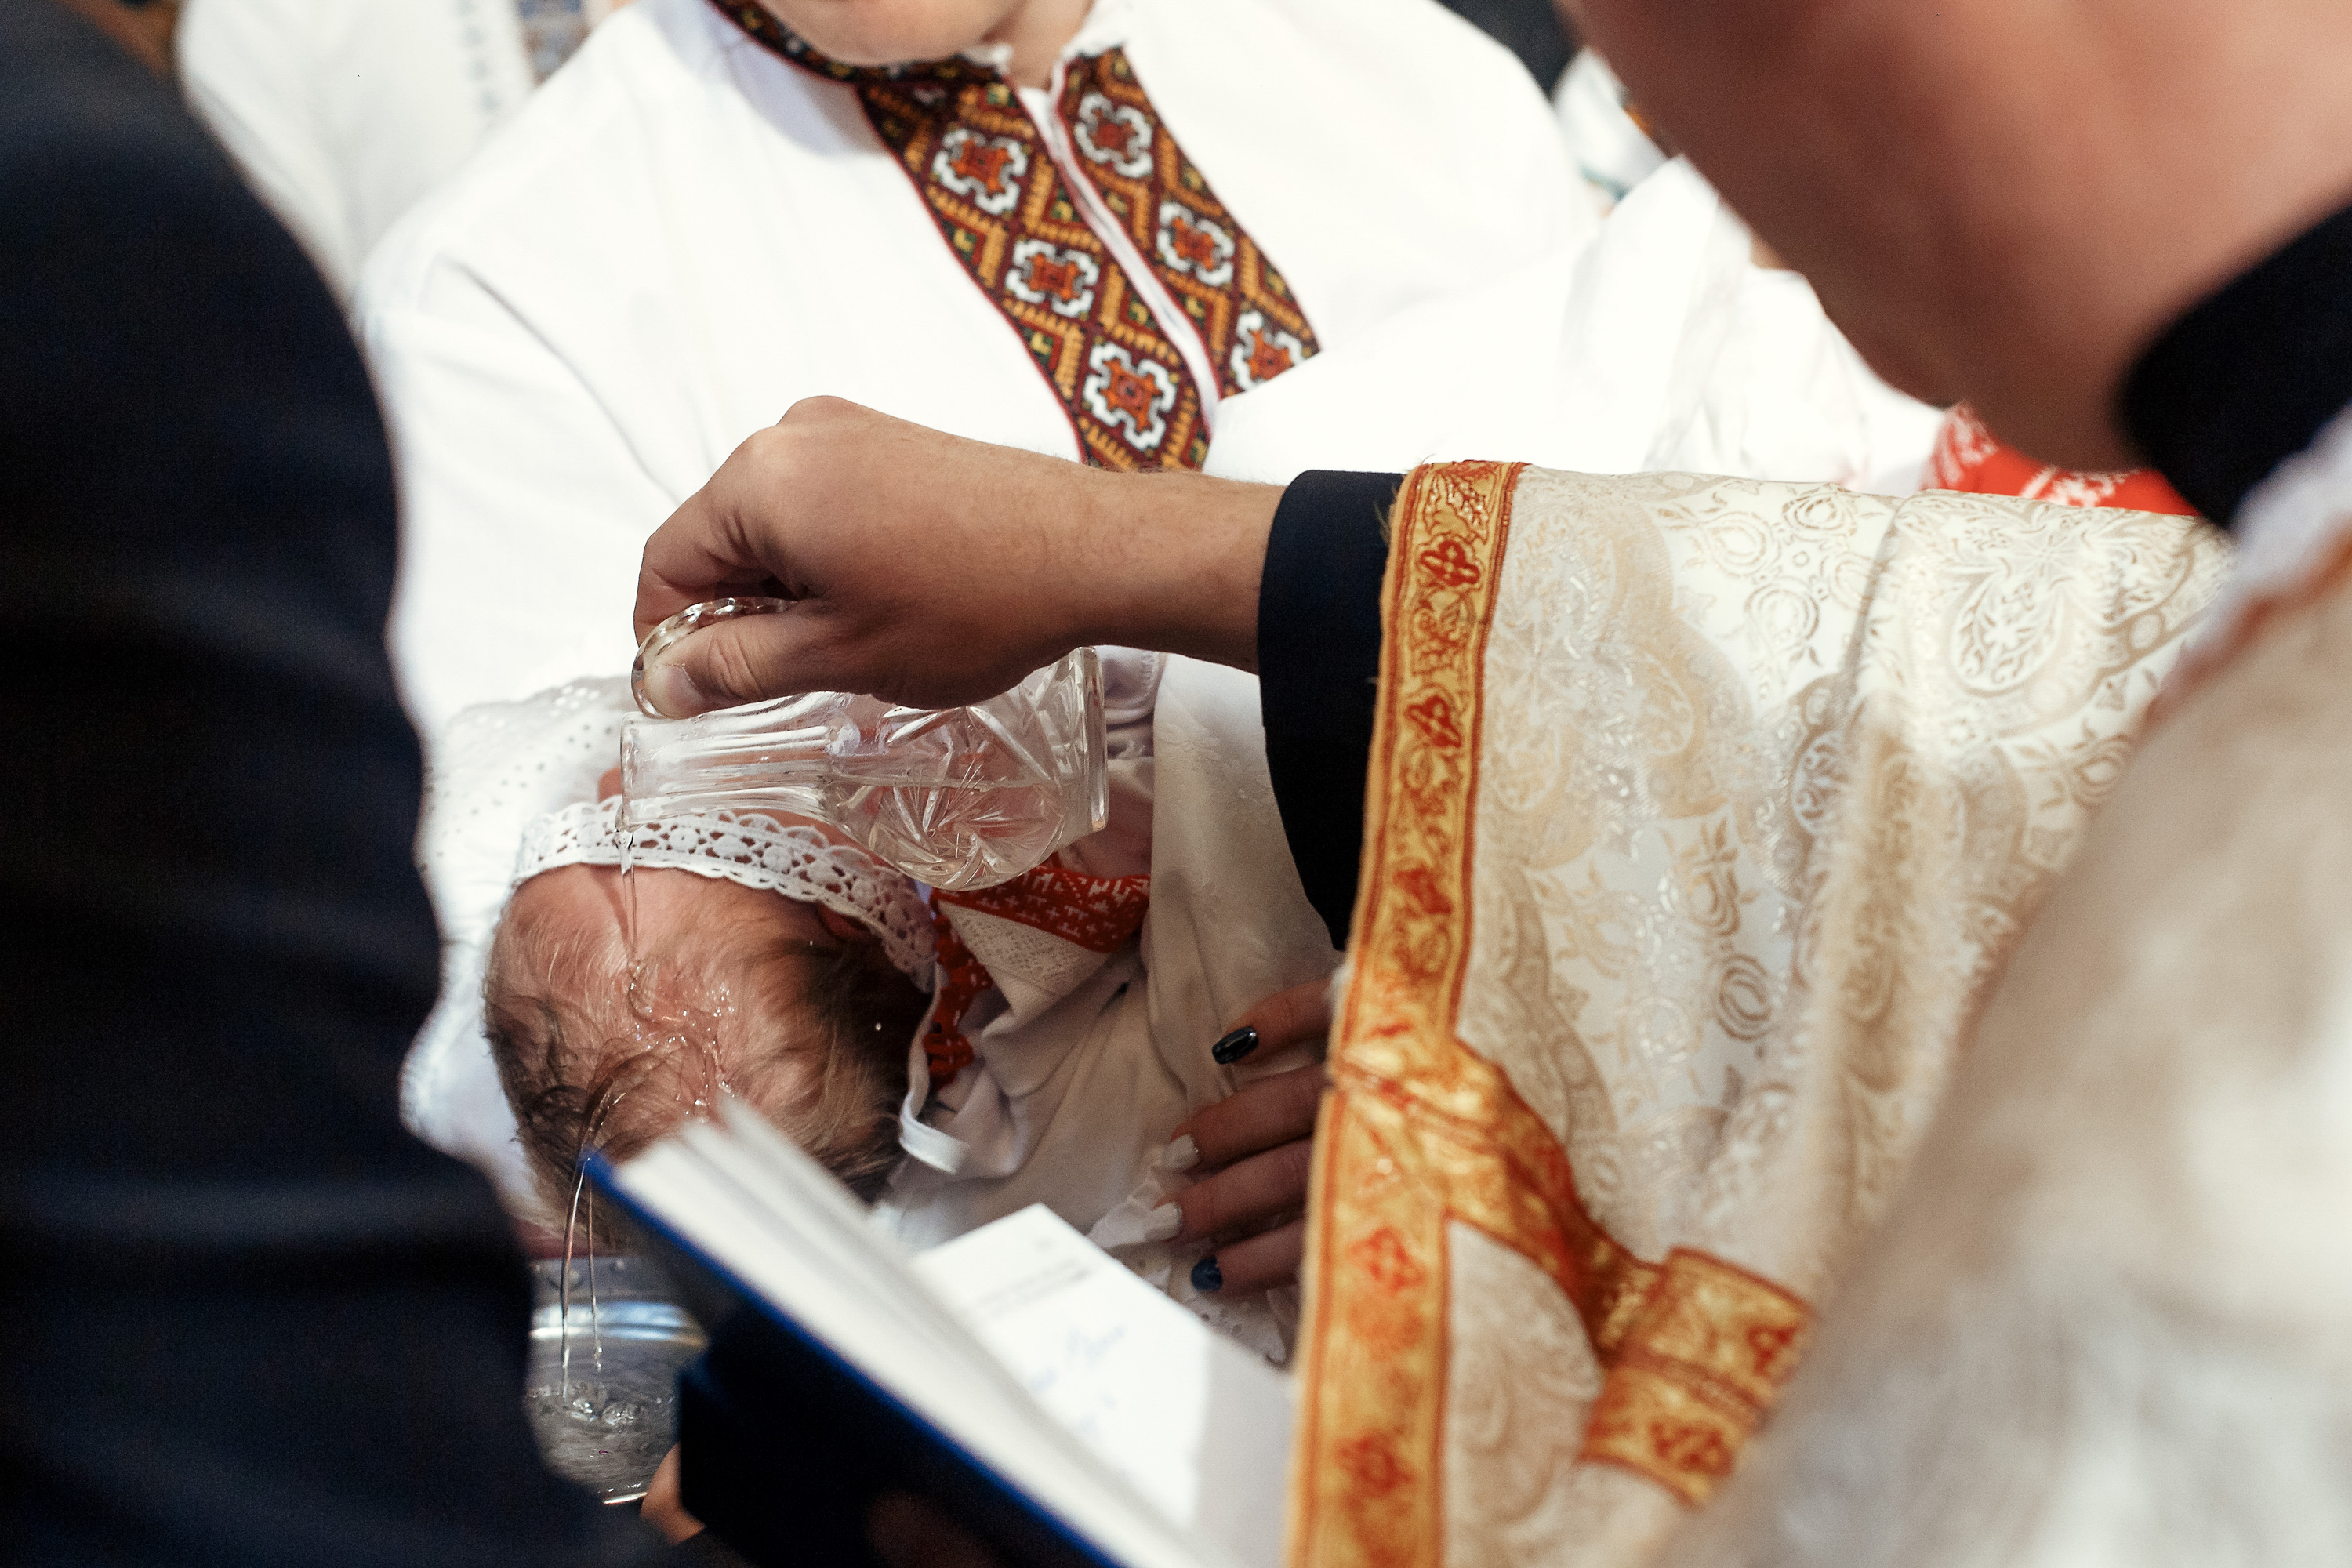 Baby being baptized - priest pouring water over the head of the baby